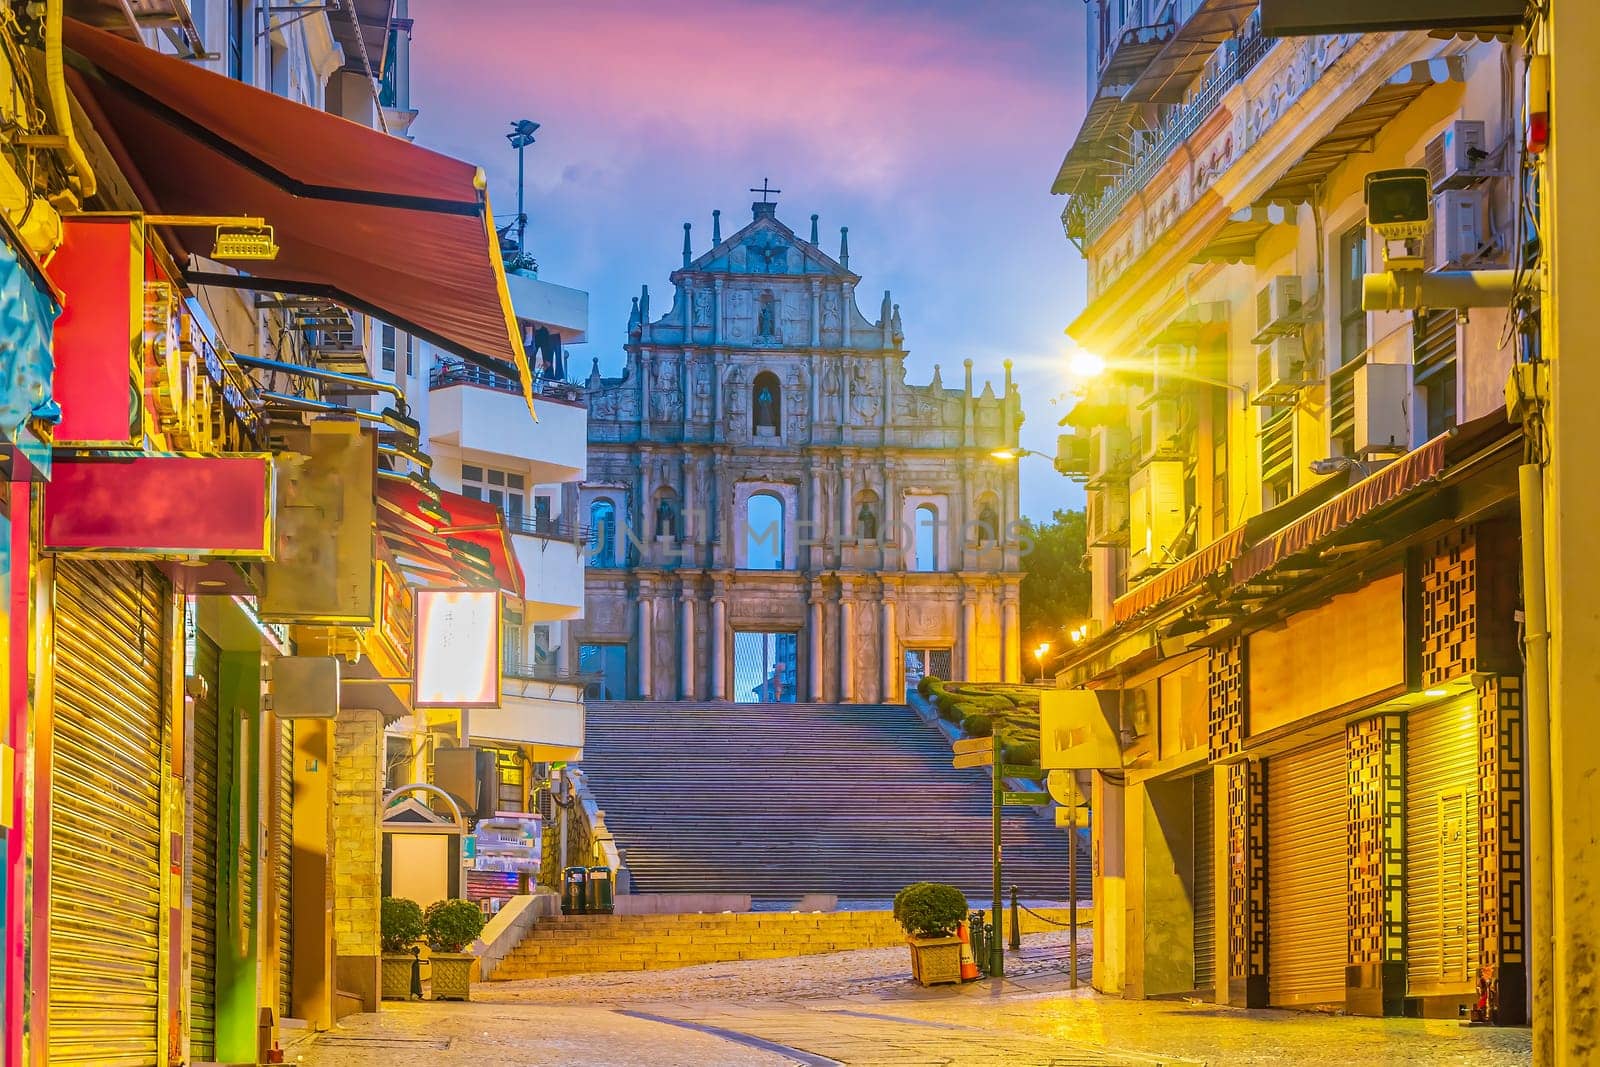 Ruins Of Saint Paul's Cathedral in Macau by f11photo